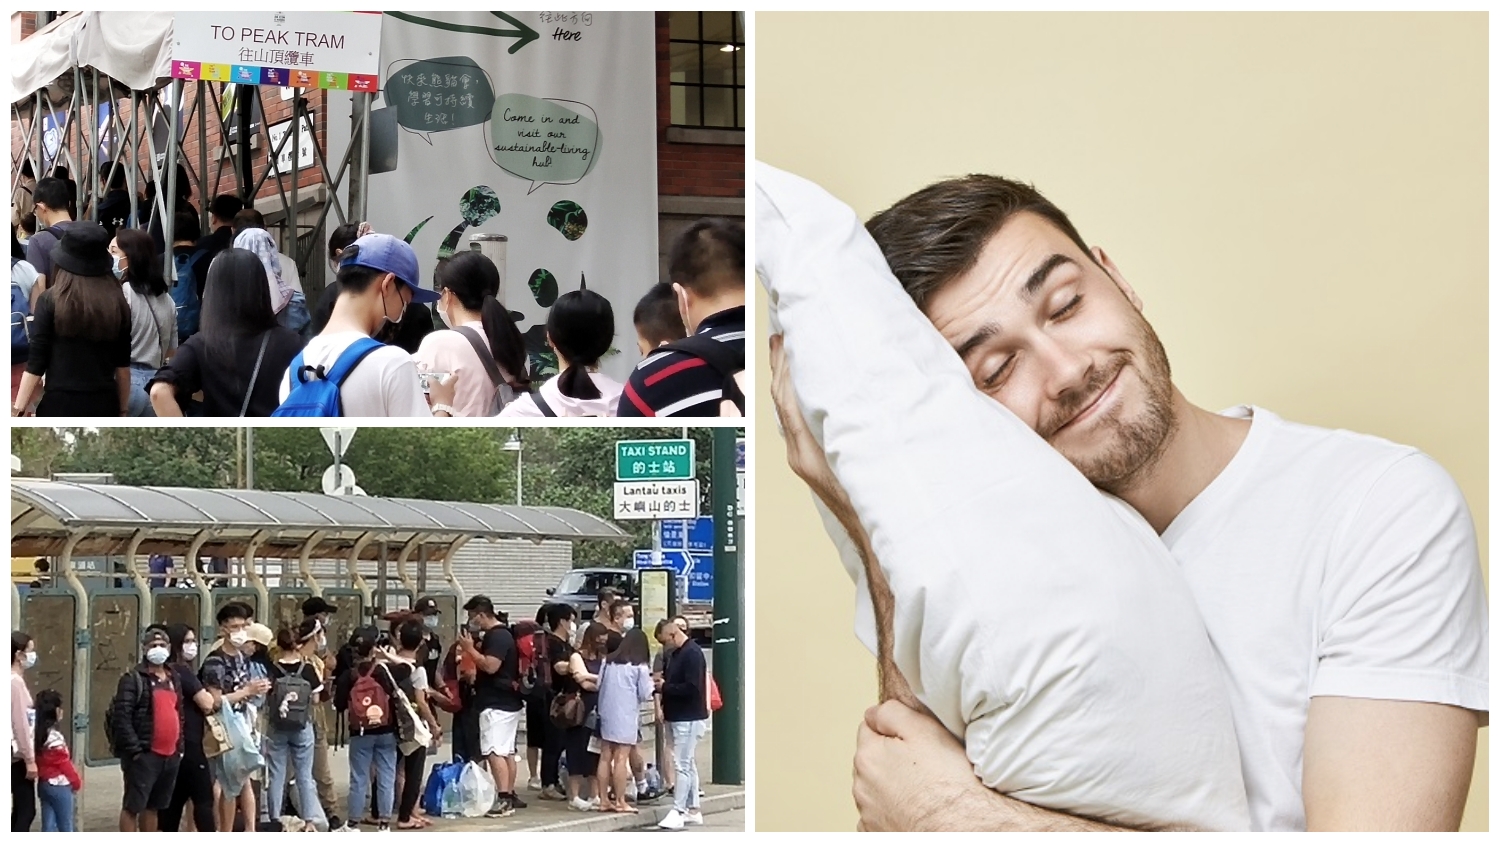 Frank reminds travelers already in Hong Kong: don’t laze in bed